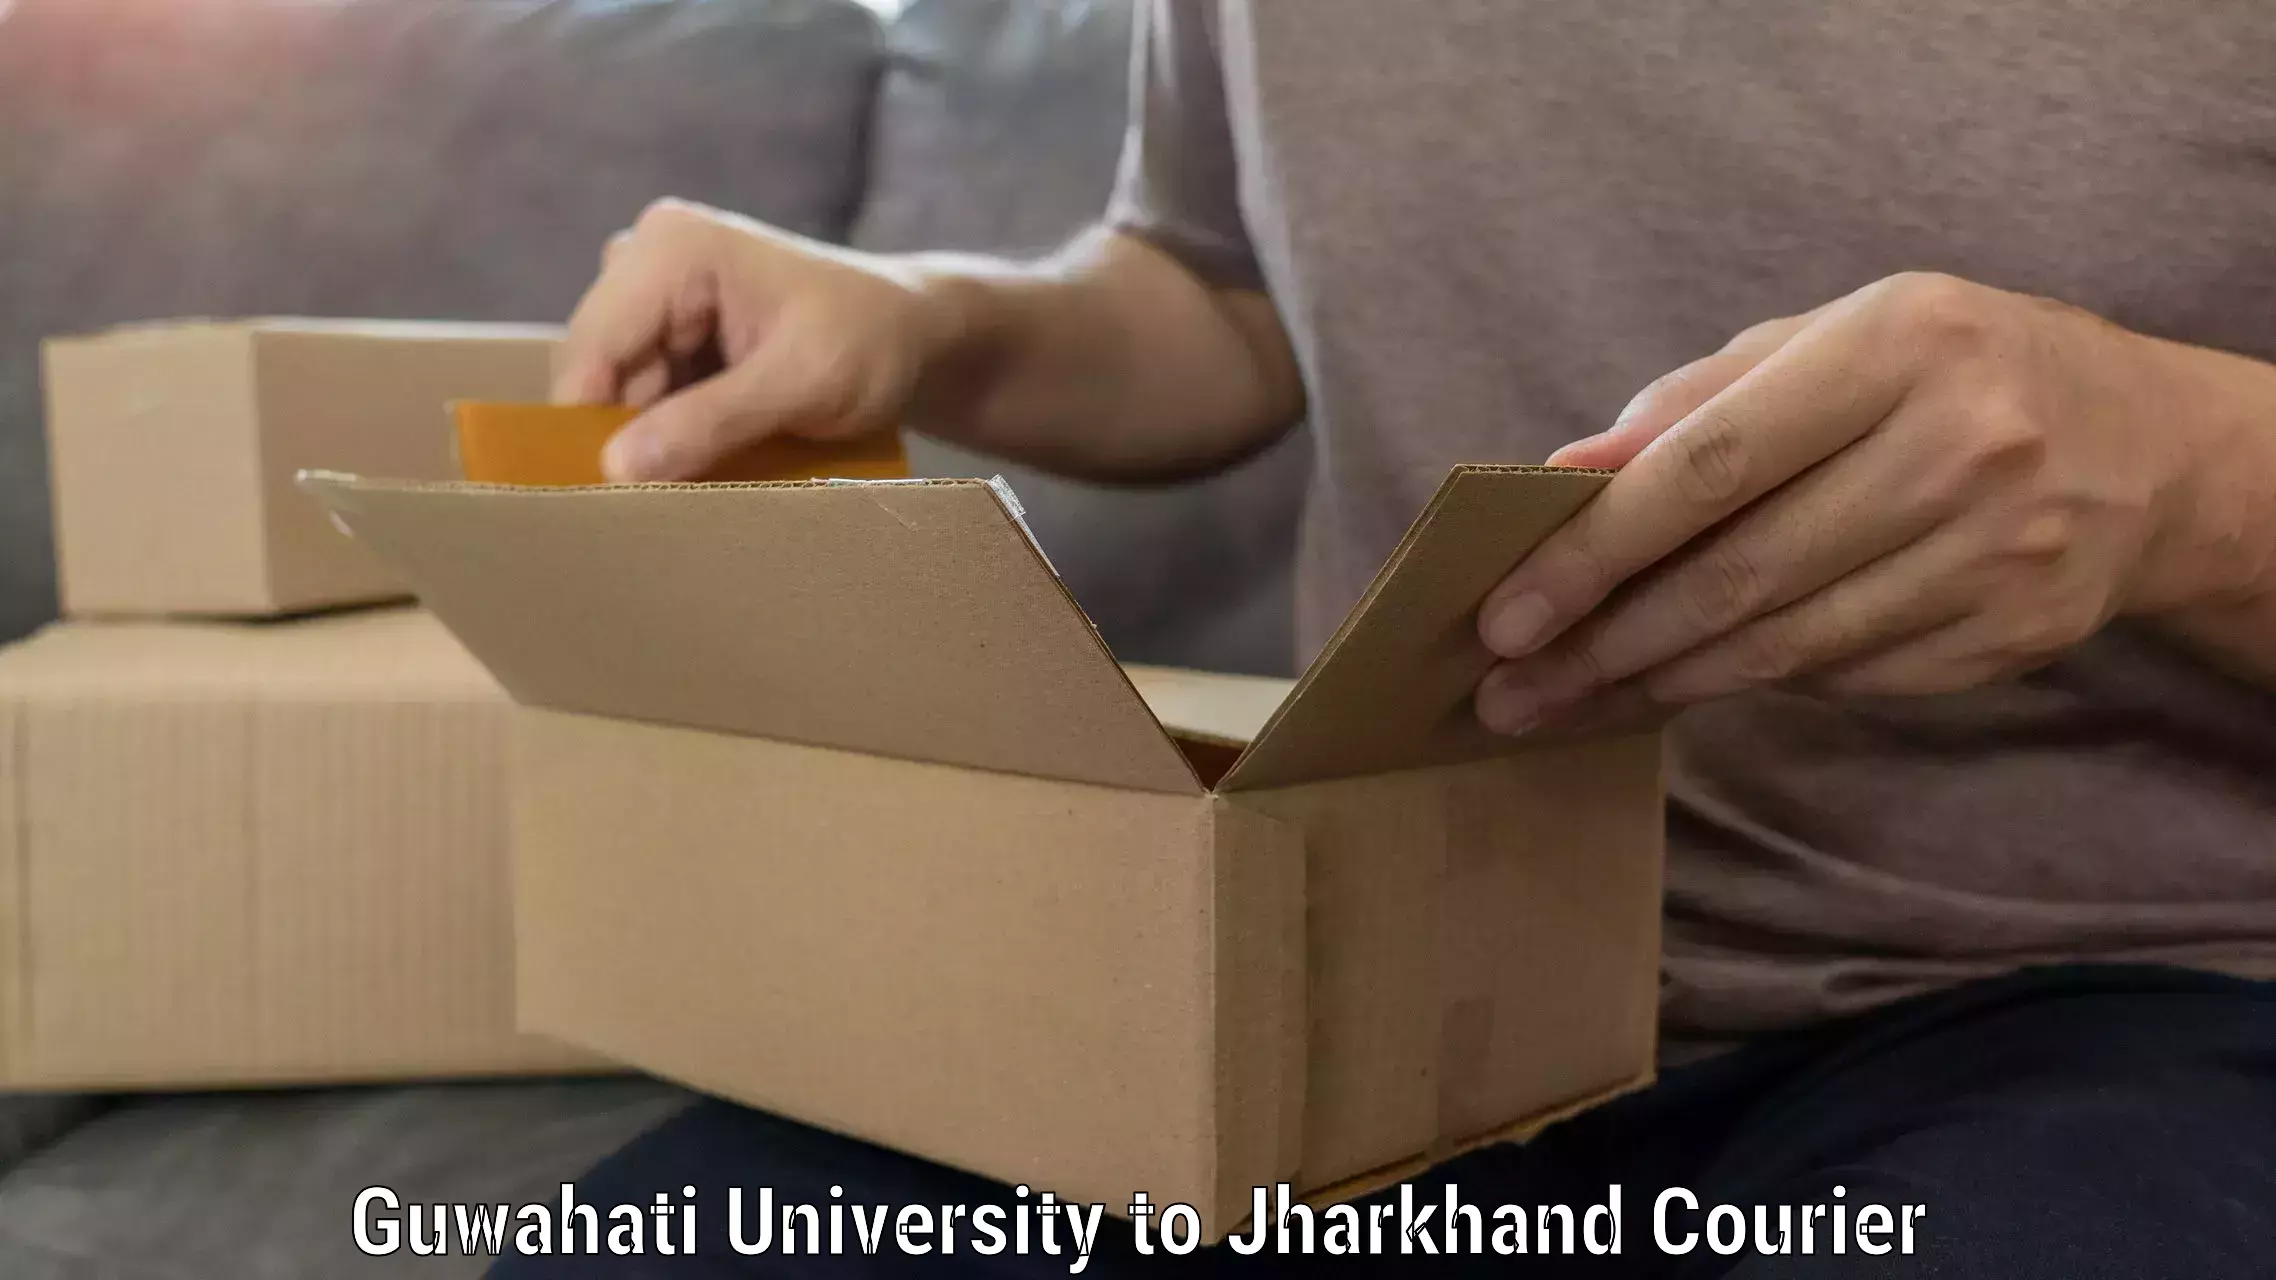 Specialized furniture moving Guwahati University to Jharkhand